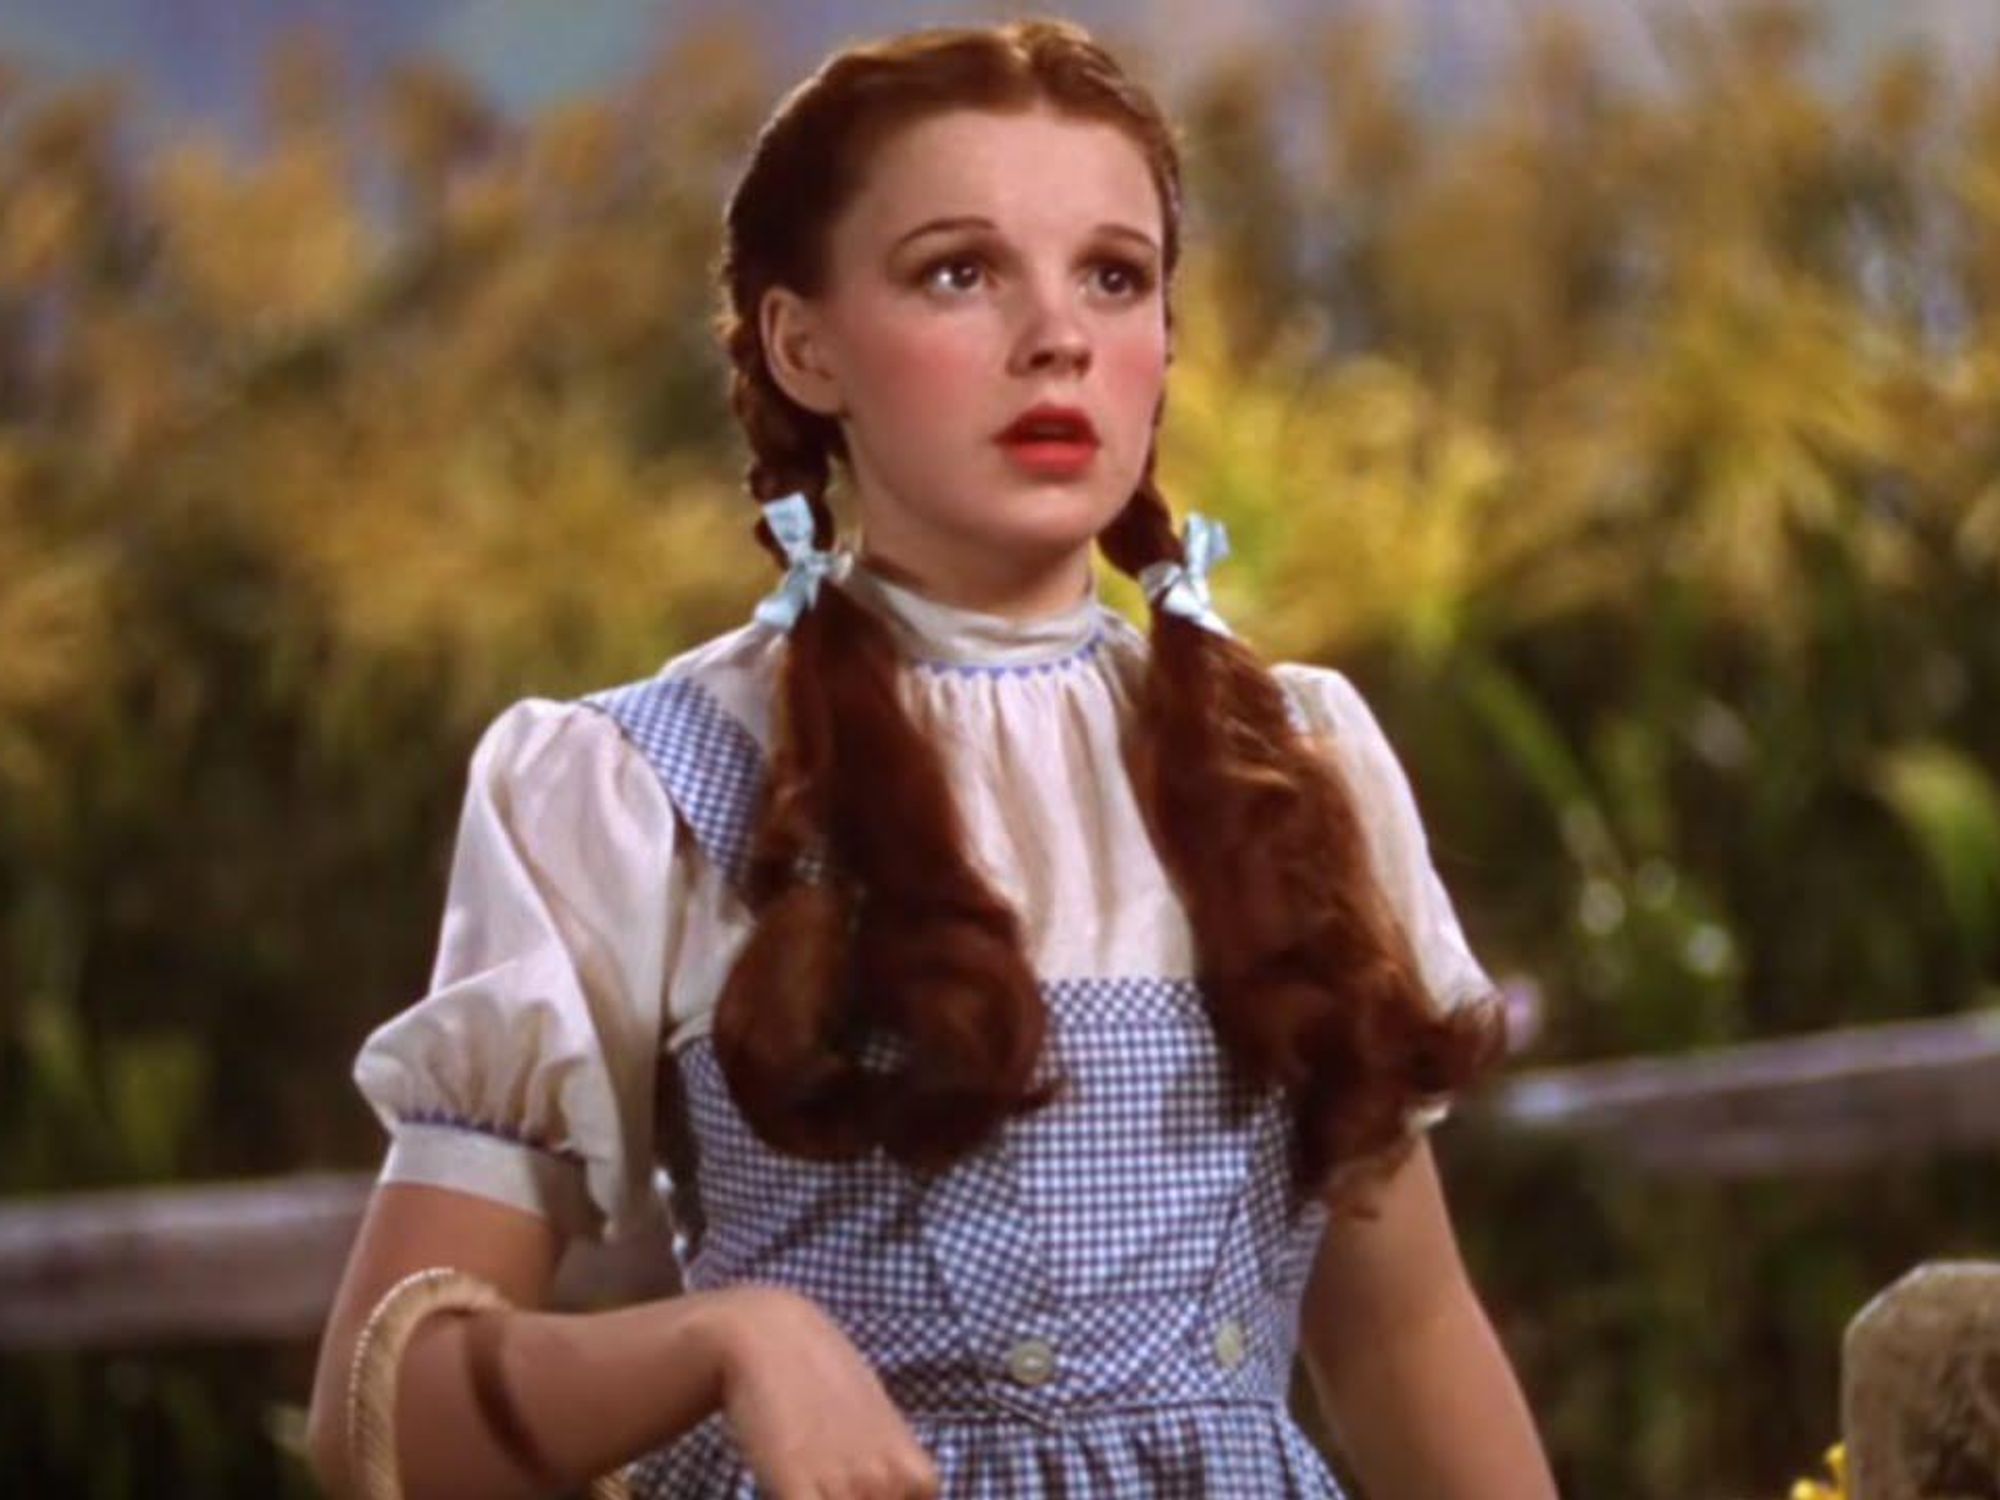 The Wizard of Oz' returning to theaters for Judy Garland's 100th birthday 